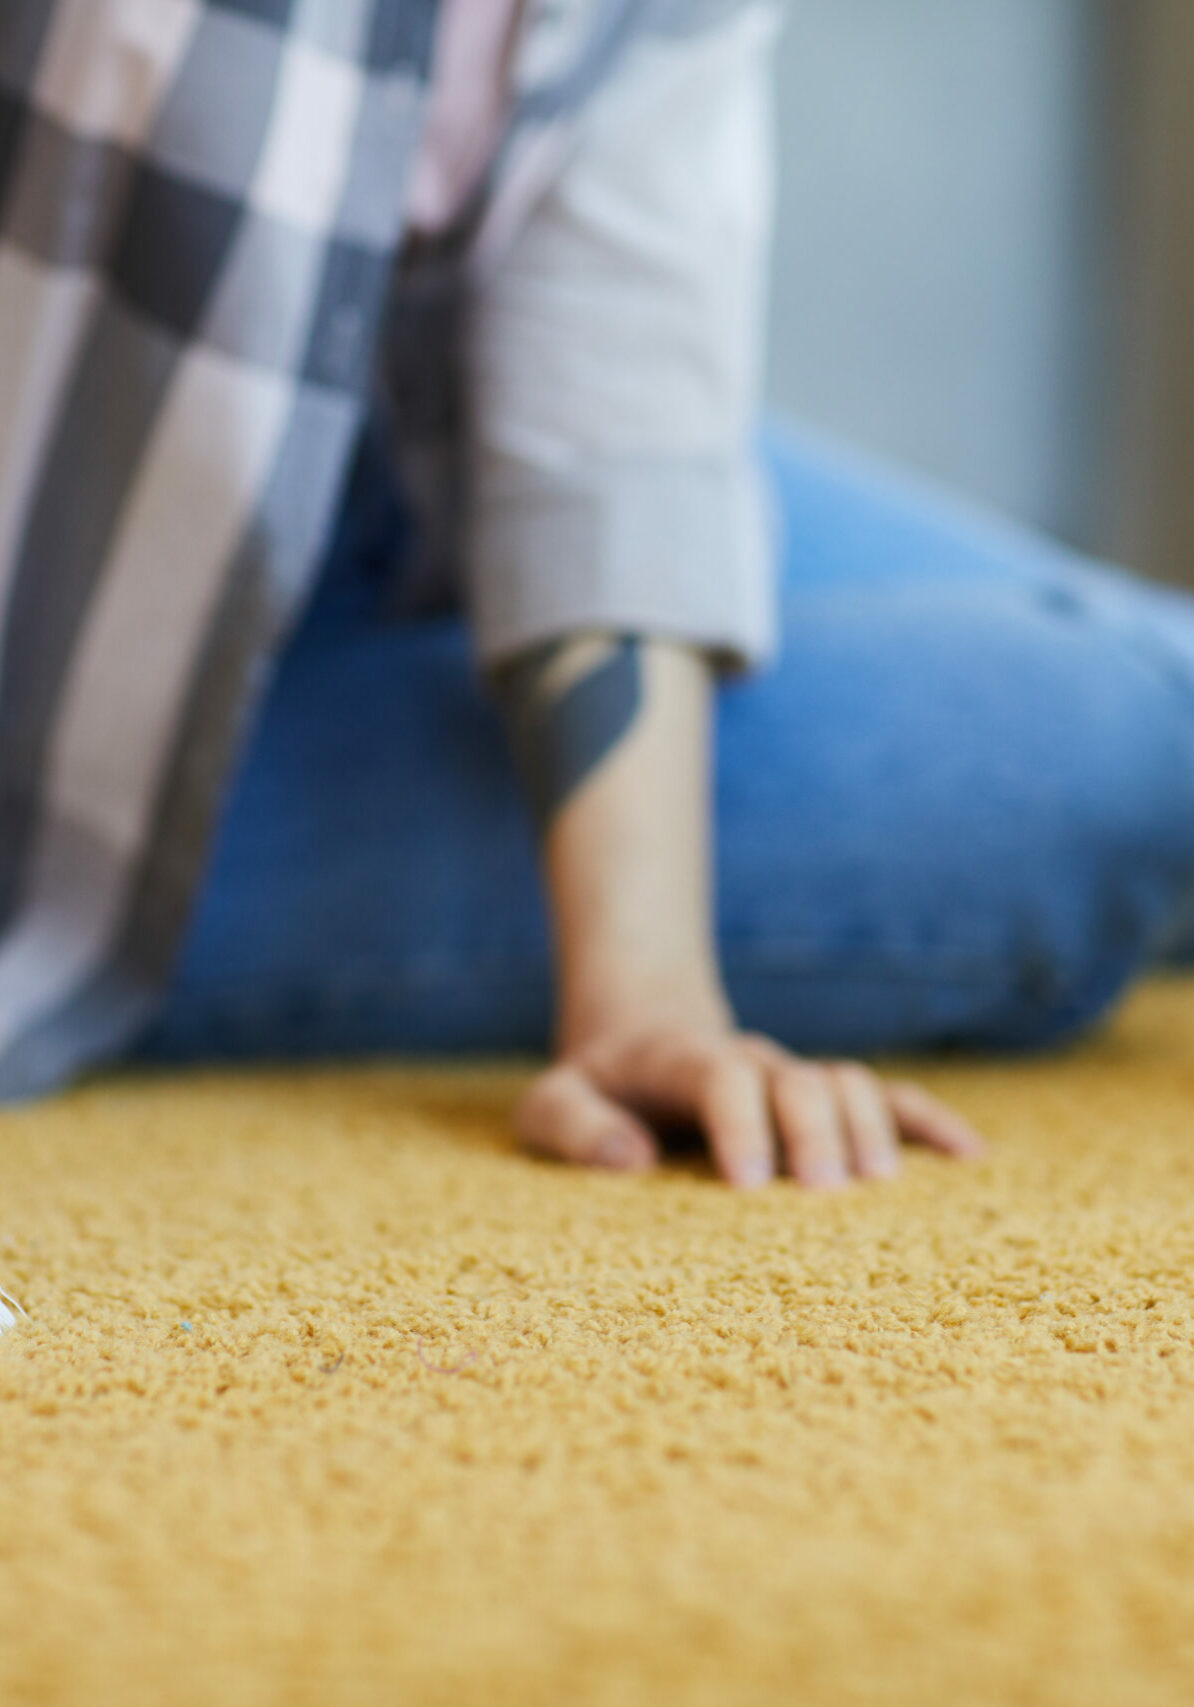 Close-up of housekeeper sitting on the floor and washing the carpet with brush at home